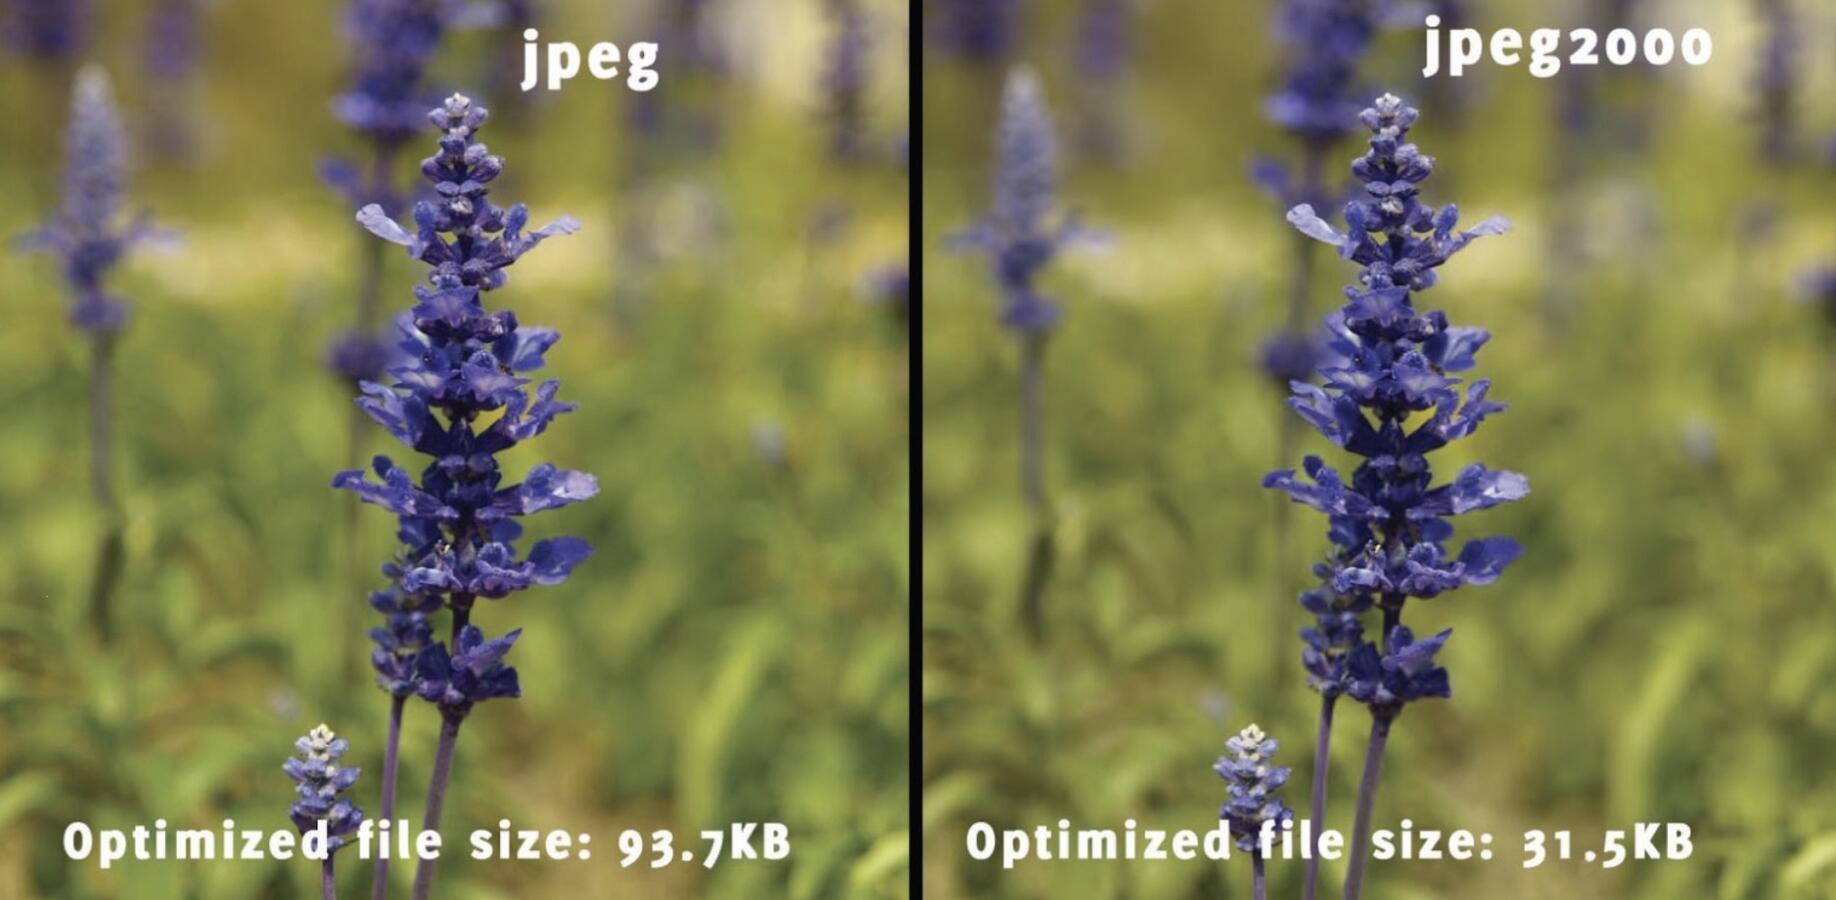 Side-by-side comparison of file size and image quality of JPEG and JPEG2000 images